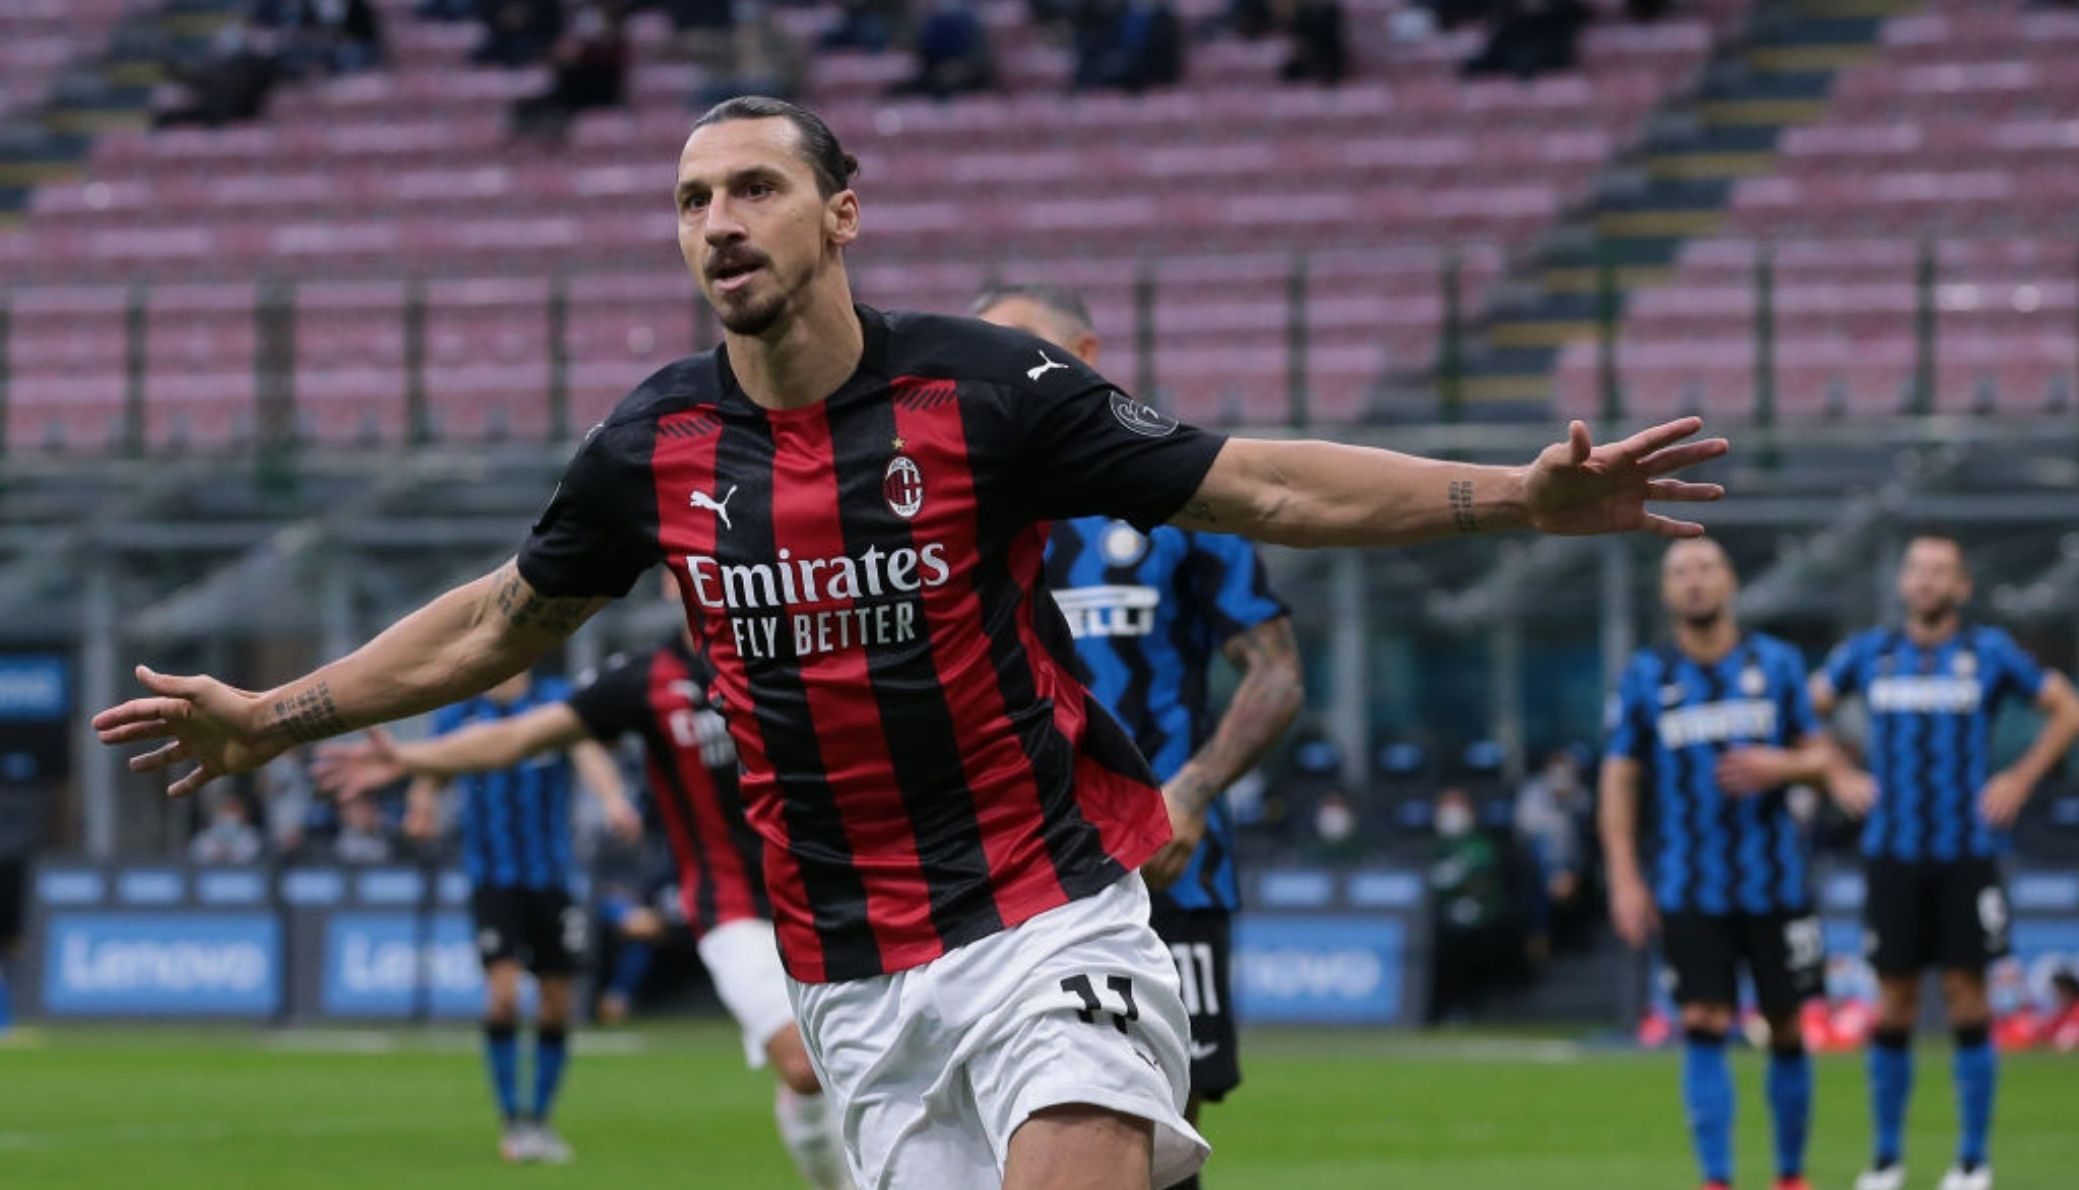 In this tactical analysis, we will show how Milan registered a 2-1 win over bitter rivals Inter in the first Derby della Madonnina of the season